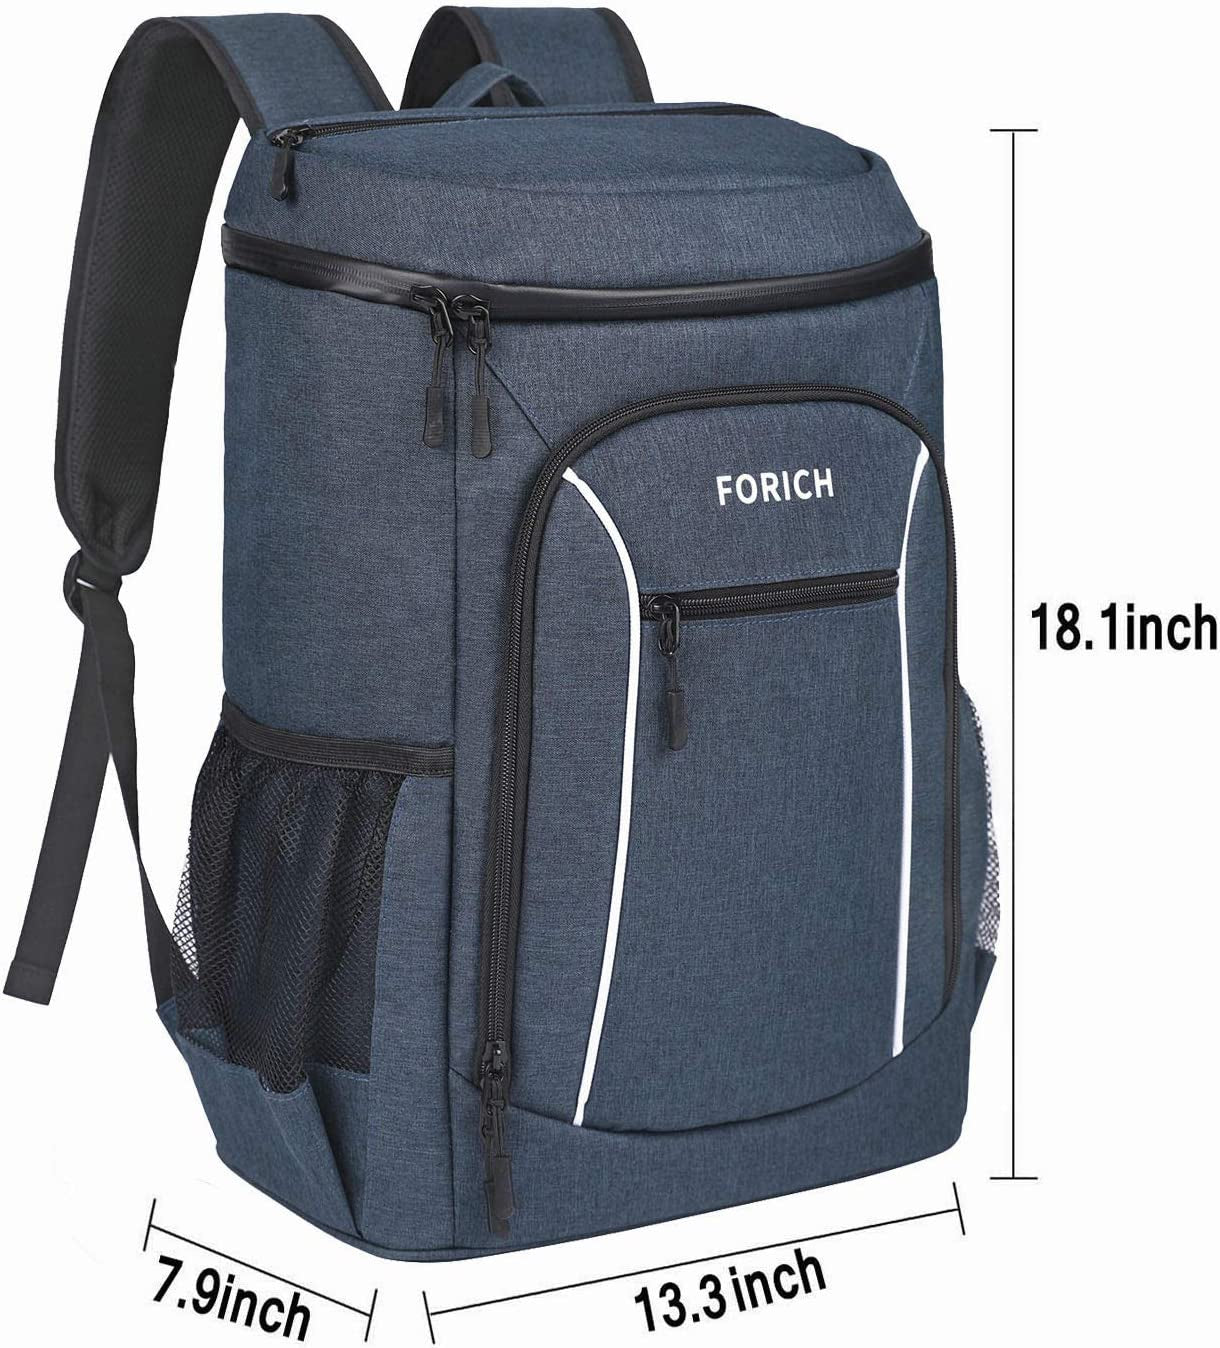 FORICH Insulated Cooler Backpack Lightweight Soft Cooler Bag Leakproof Backpack Cooler for Men Women to Lunch Work Picnic Beach Camping Hiking Park Day Trips, 30 Cans